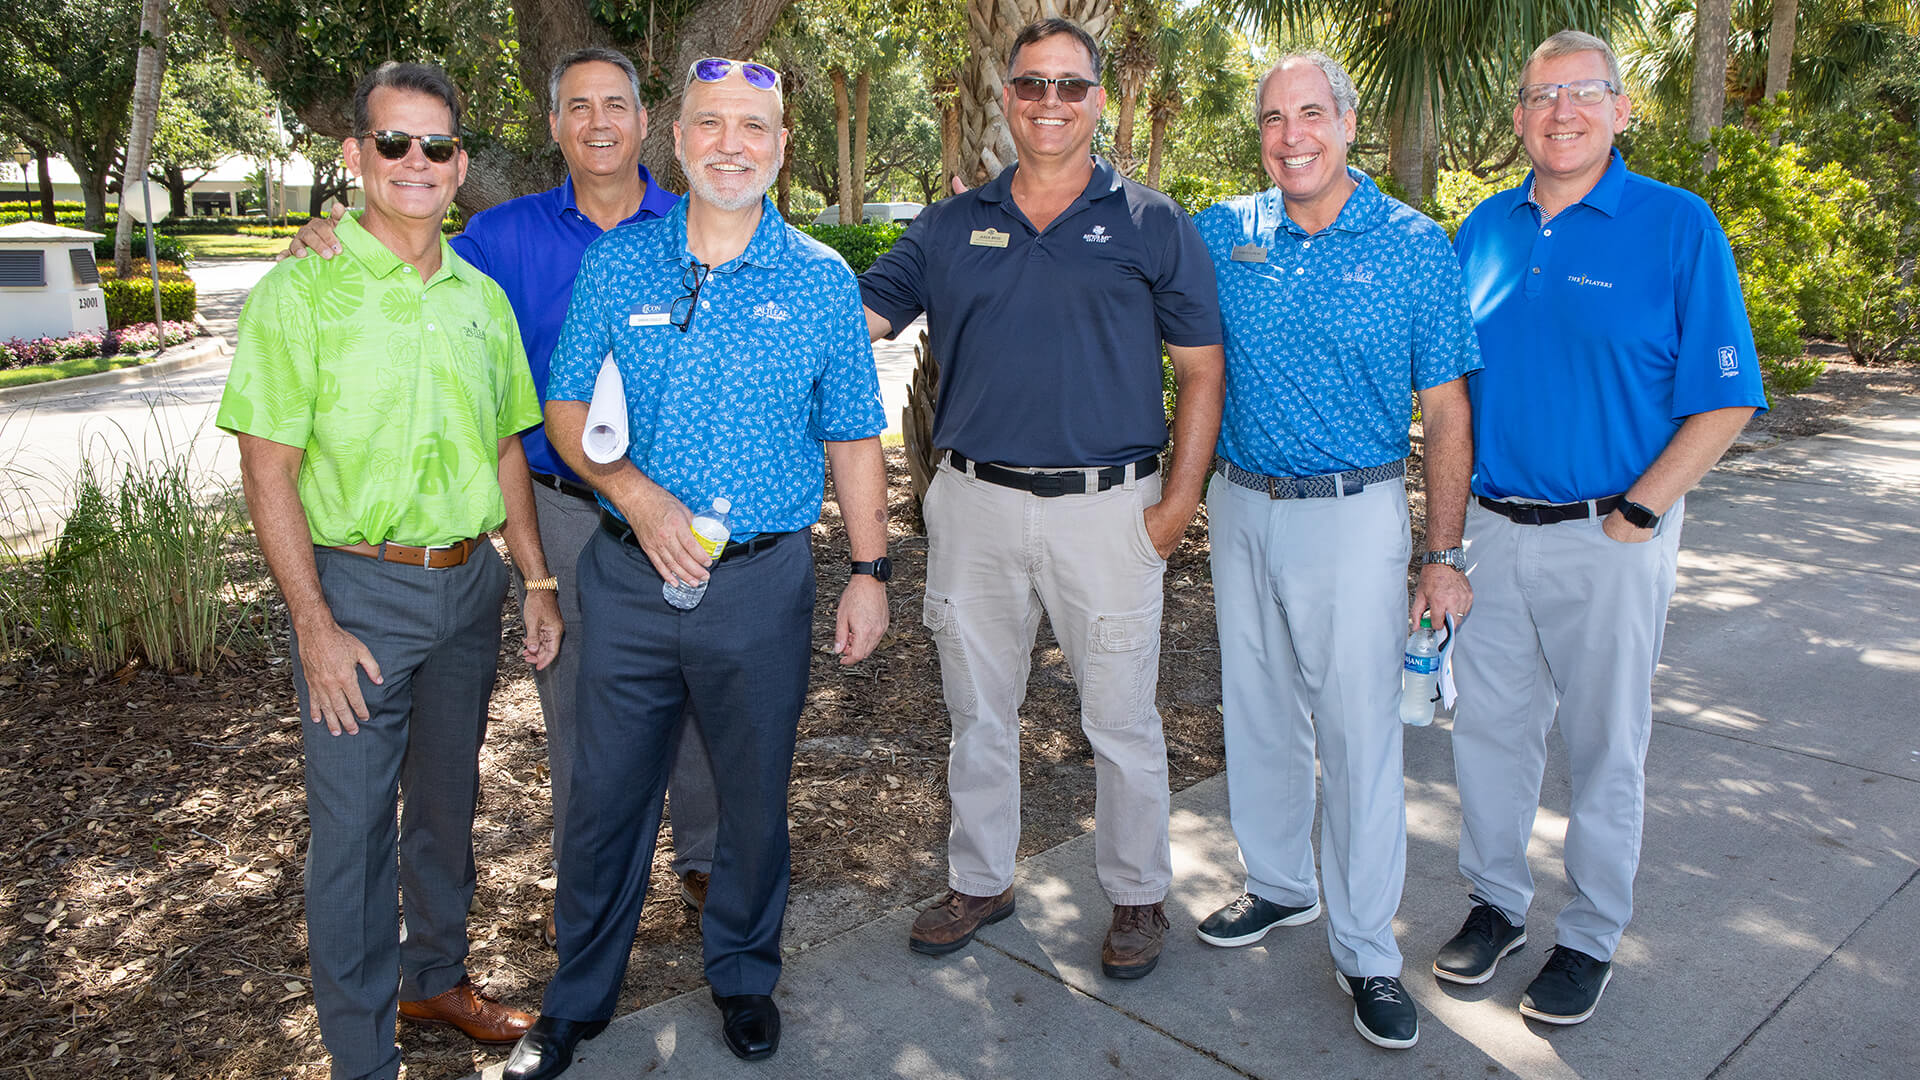 A group of men in blue shirts posing for a photo at the championship golf course in Bonita Springs.